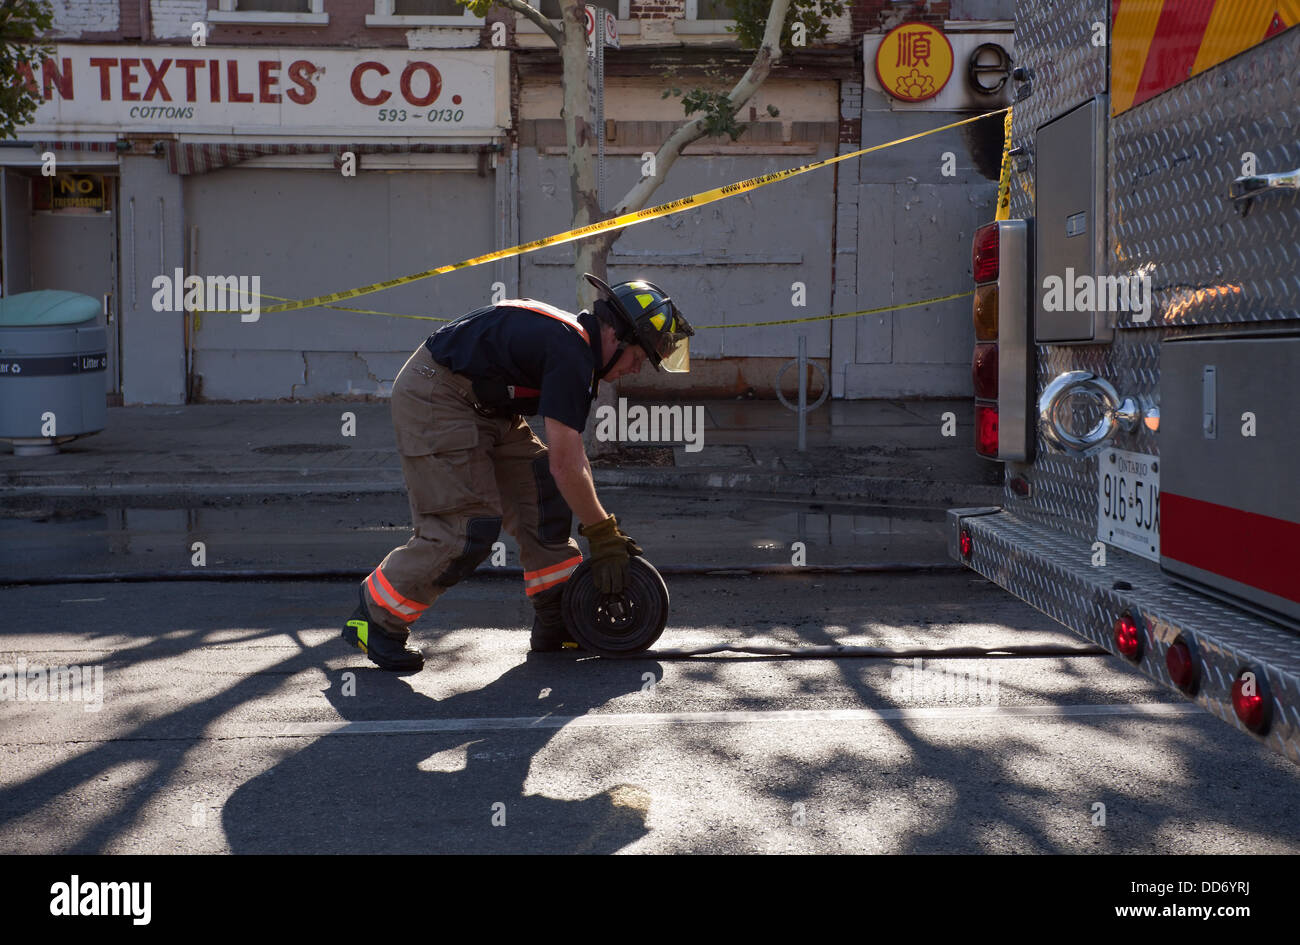 A firefighter rolls up a fire hose after a fire in chinatown, Toronto, Ontario, Canada. Stock Photo